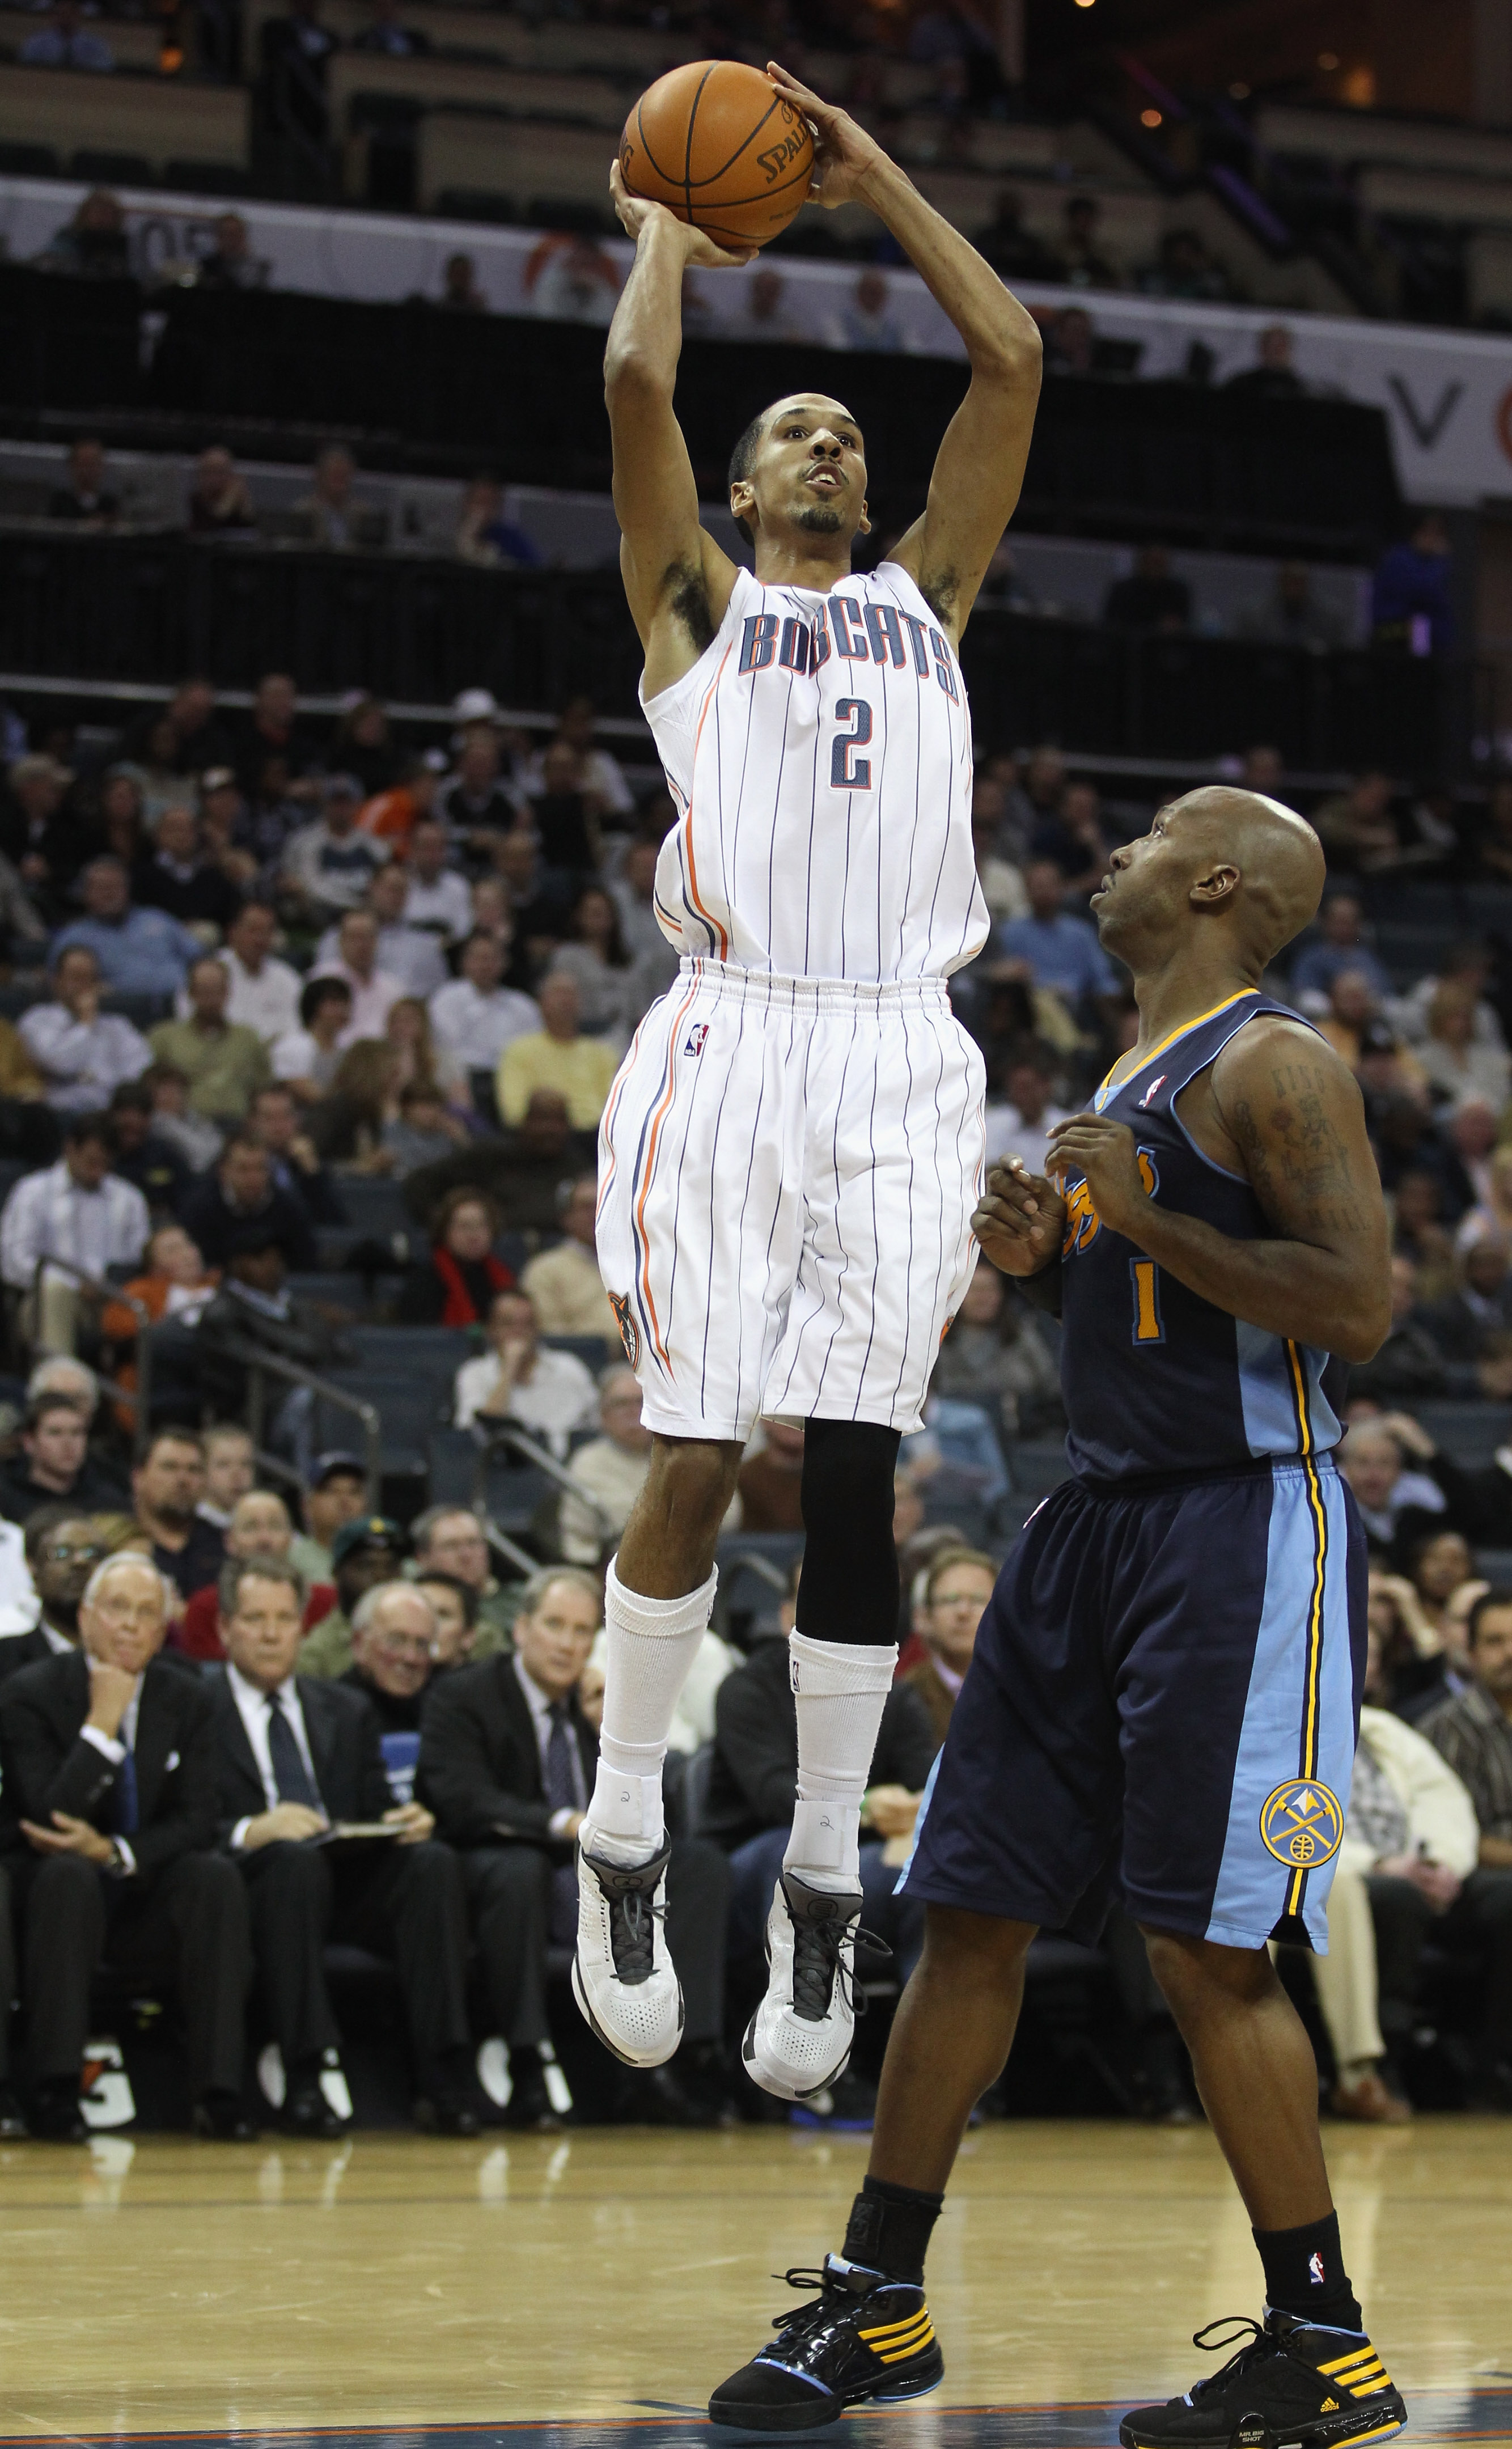 CHARLOTTE, NC - DECEMBER 07:  Chauncey Billups #1 of the Denver Nuggets watches a shot by Shaun Livingston #2 of the Charlotte Bobcats during their game at Time Warner Cable Arena on December 7, 2010 in Charlotte, North Carolina.  NOTE TO USER: User expre